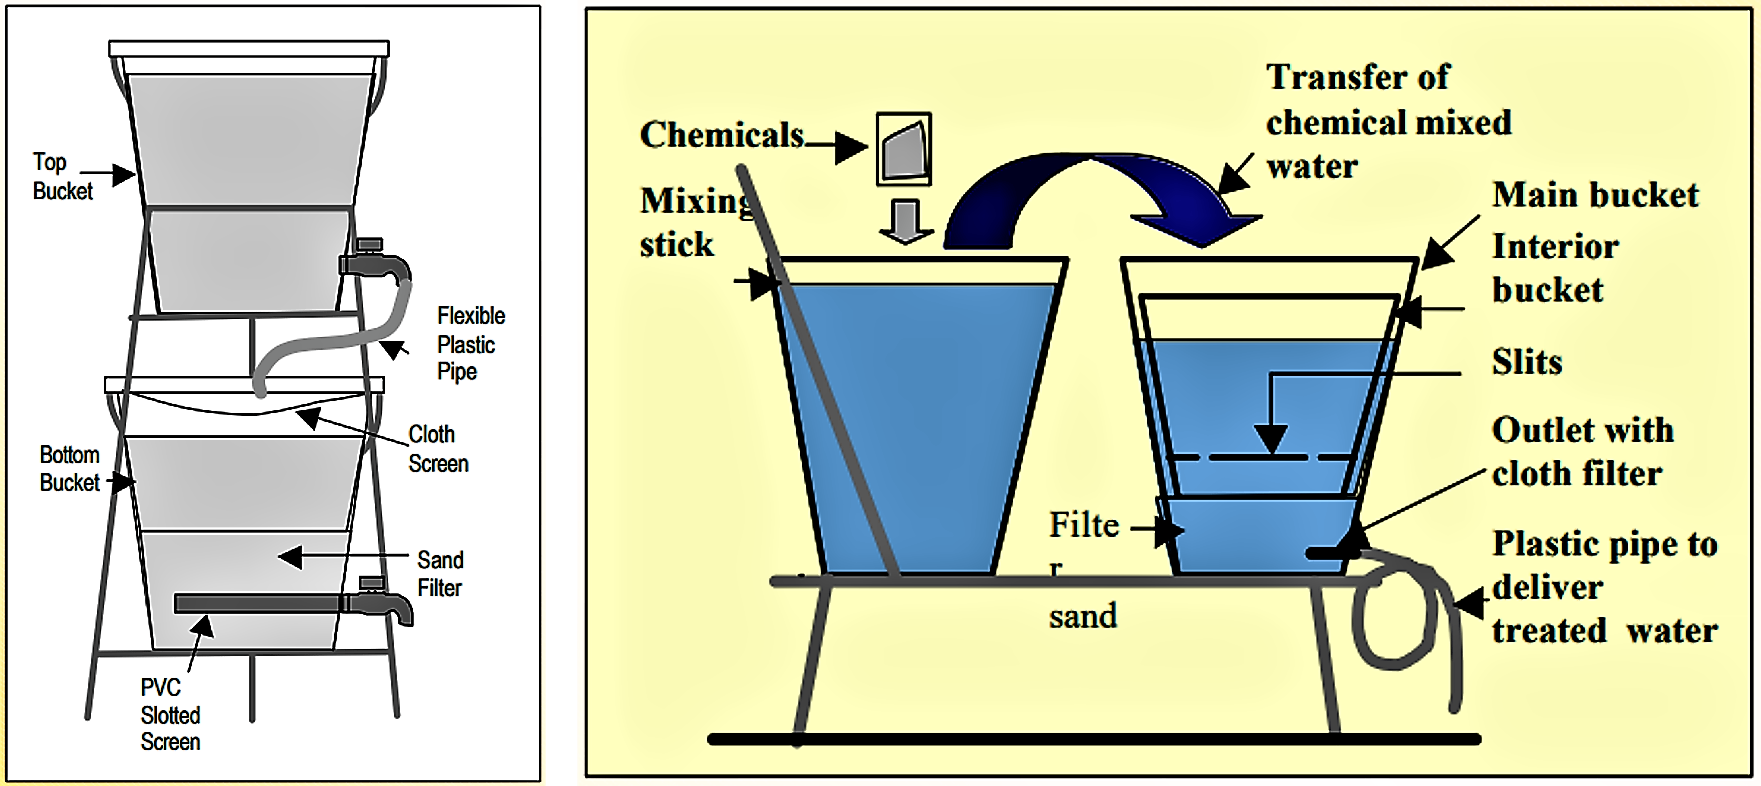 Bucket Treatment Unit (left) and Stevens Institute Technology (right), two household-level filters for arsenic removal from drinking water. Source: AHMED (n.y.)